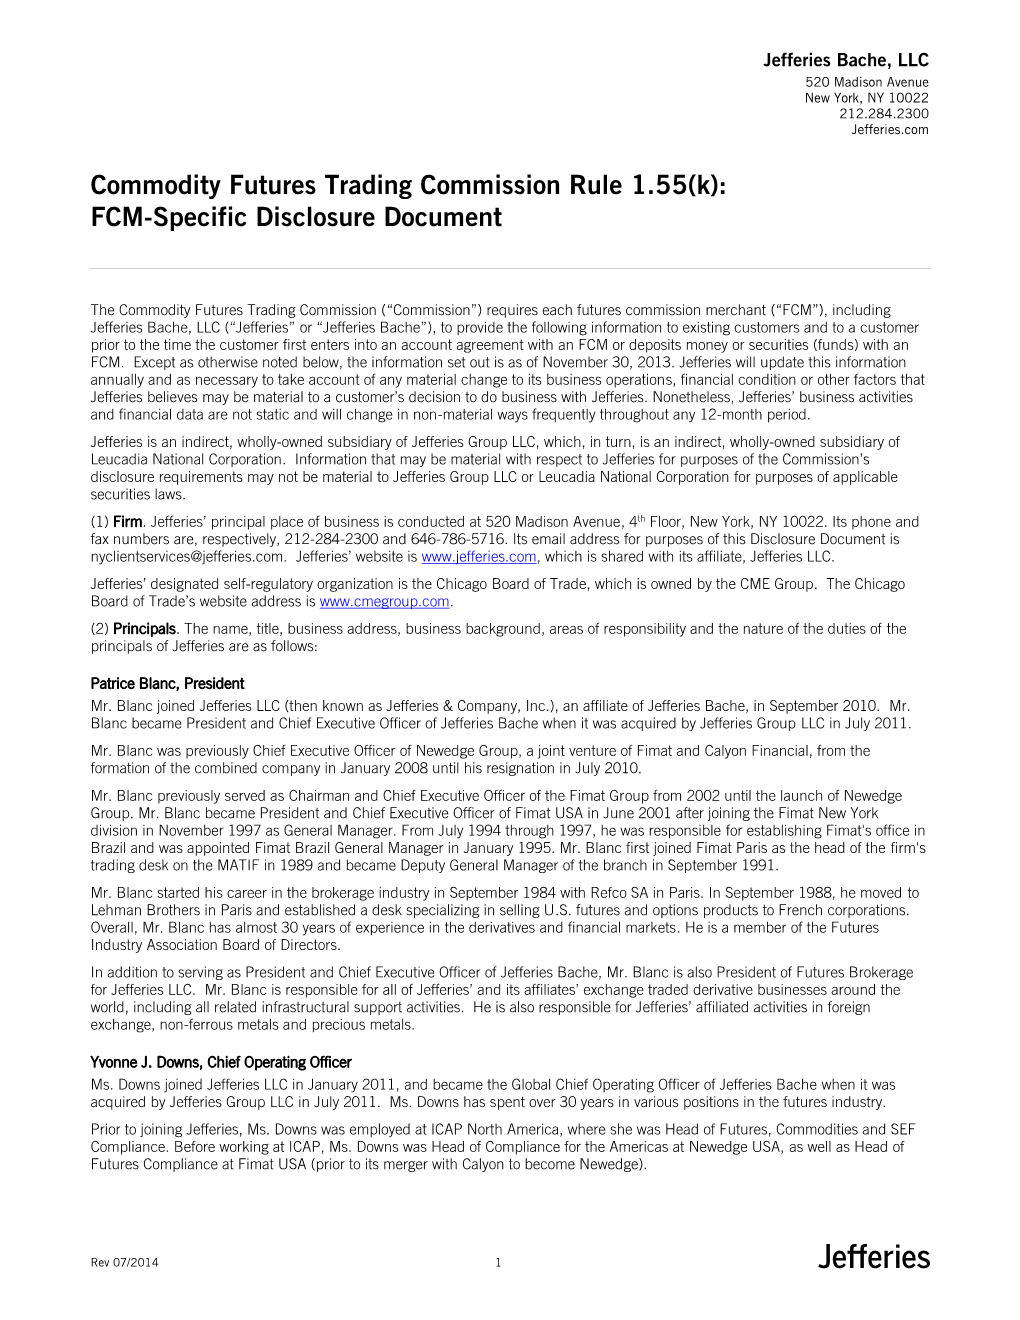 Commodity Futures Trading Commission Rule 1.55(K): FCM-Specific Disclosure Document